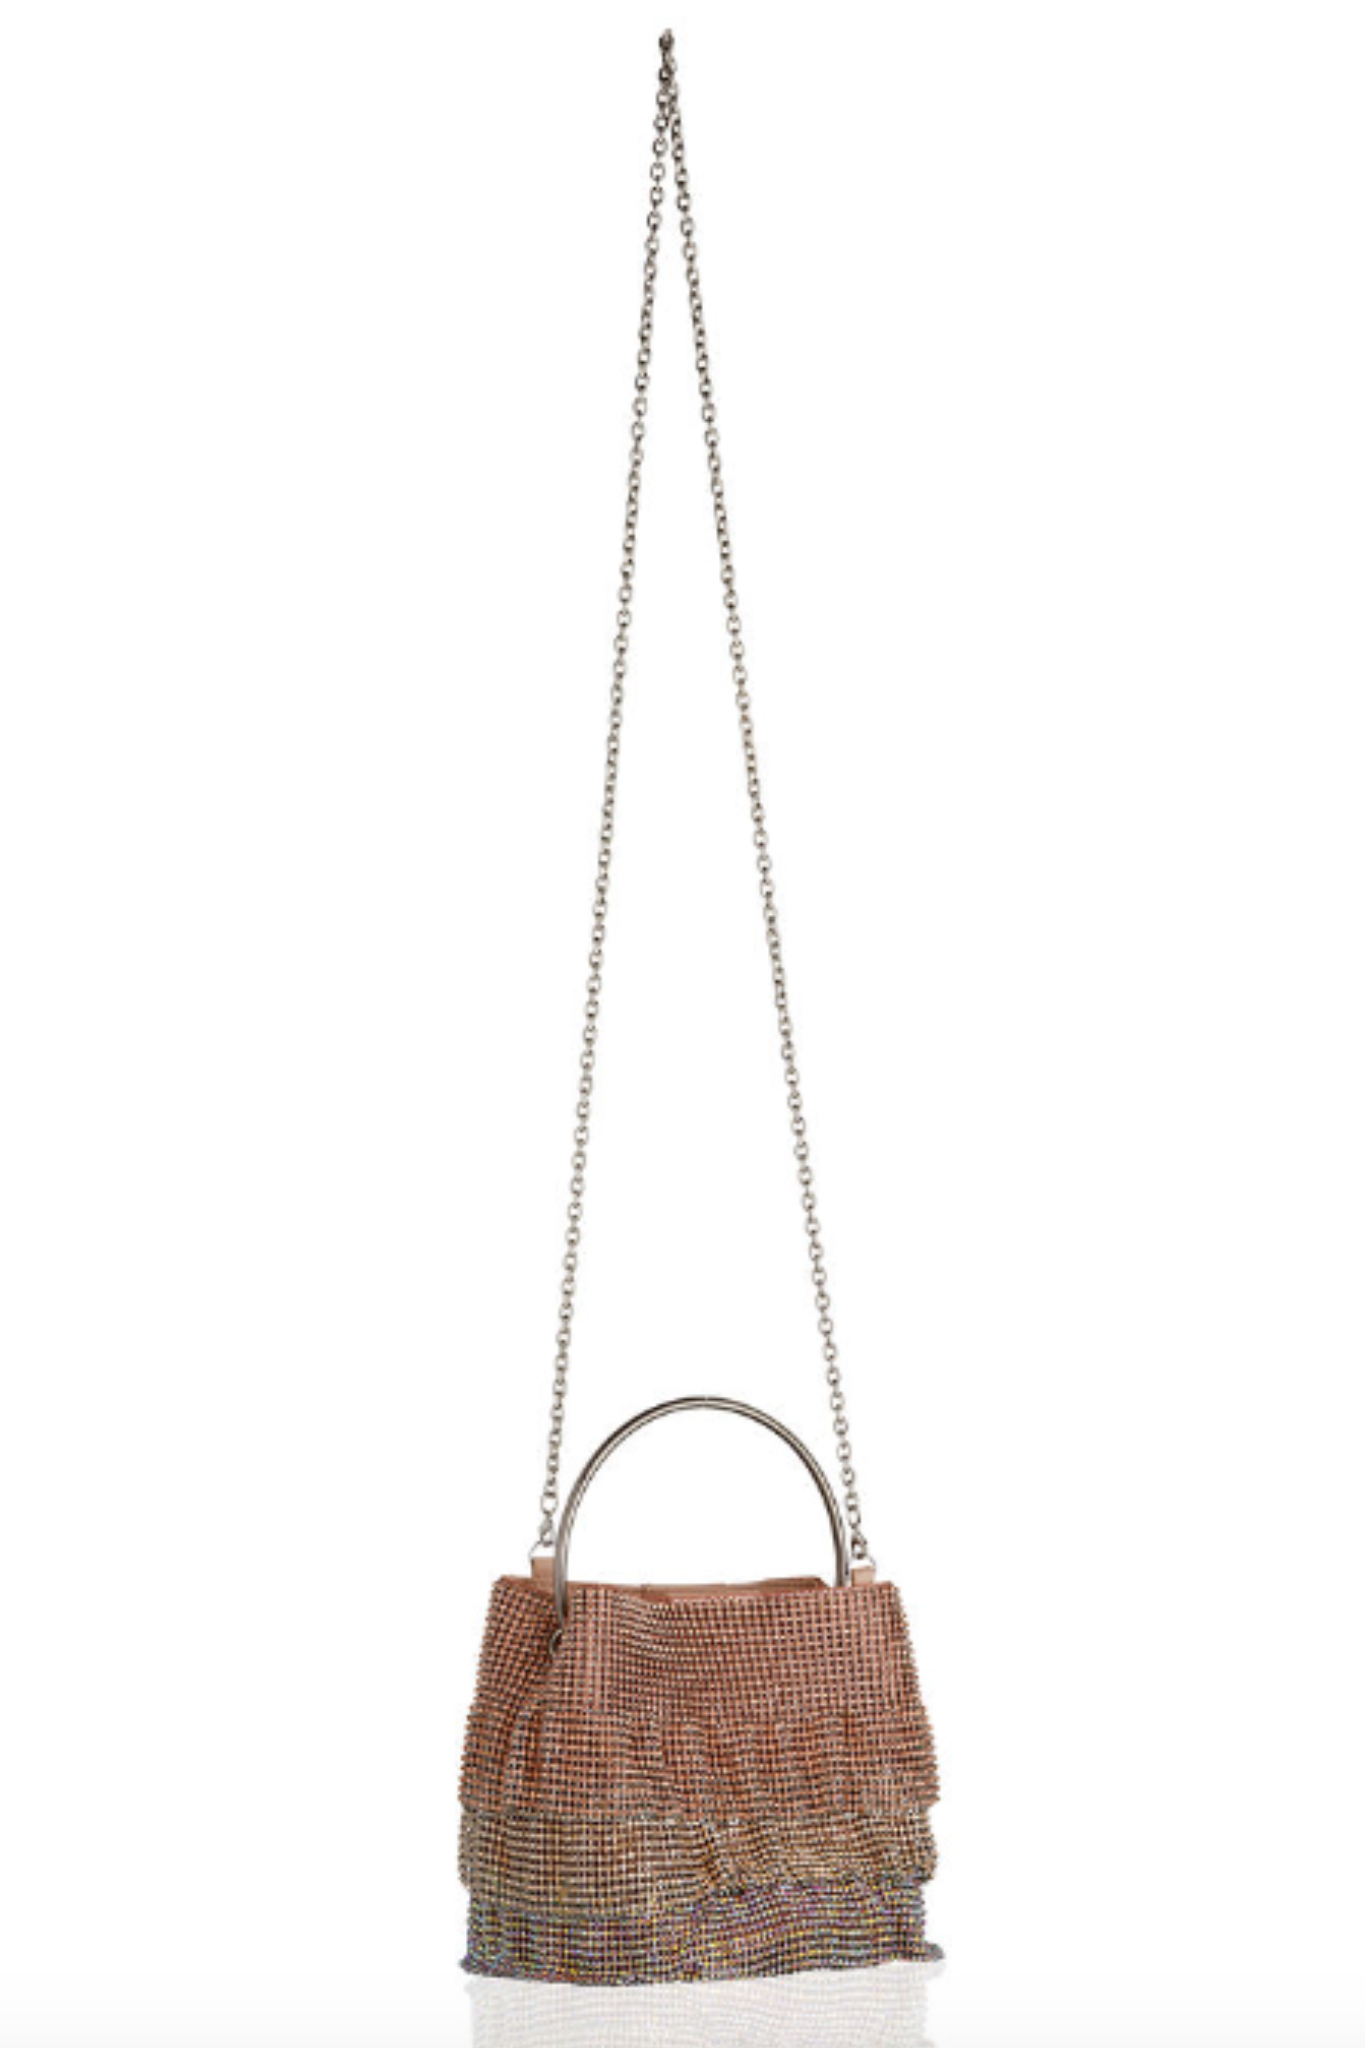 Soleil Bucket Bag in Peach by Whiting and Davis - RENTAL